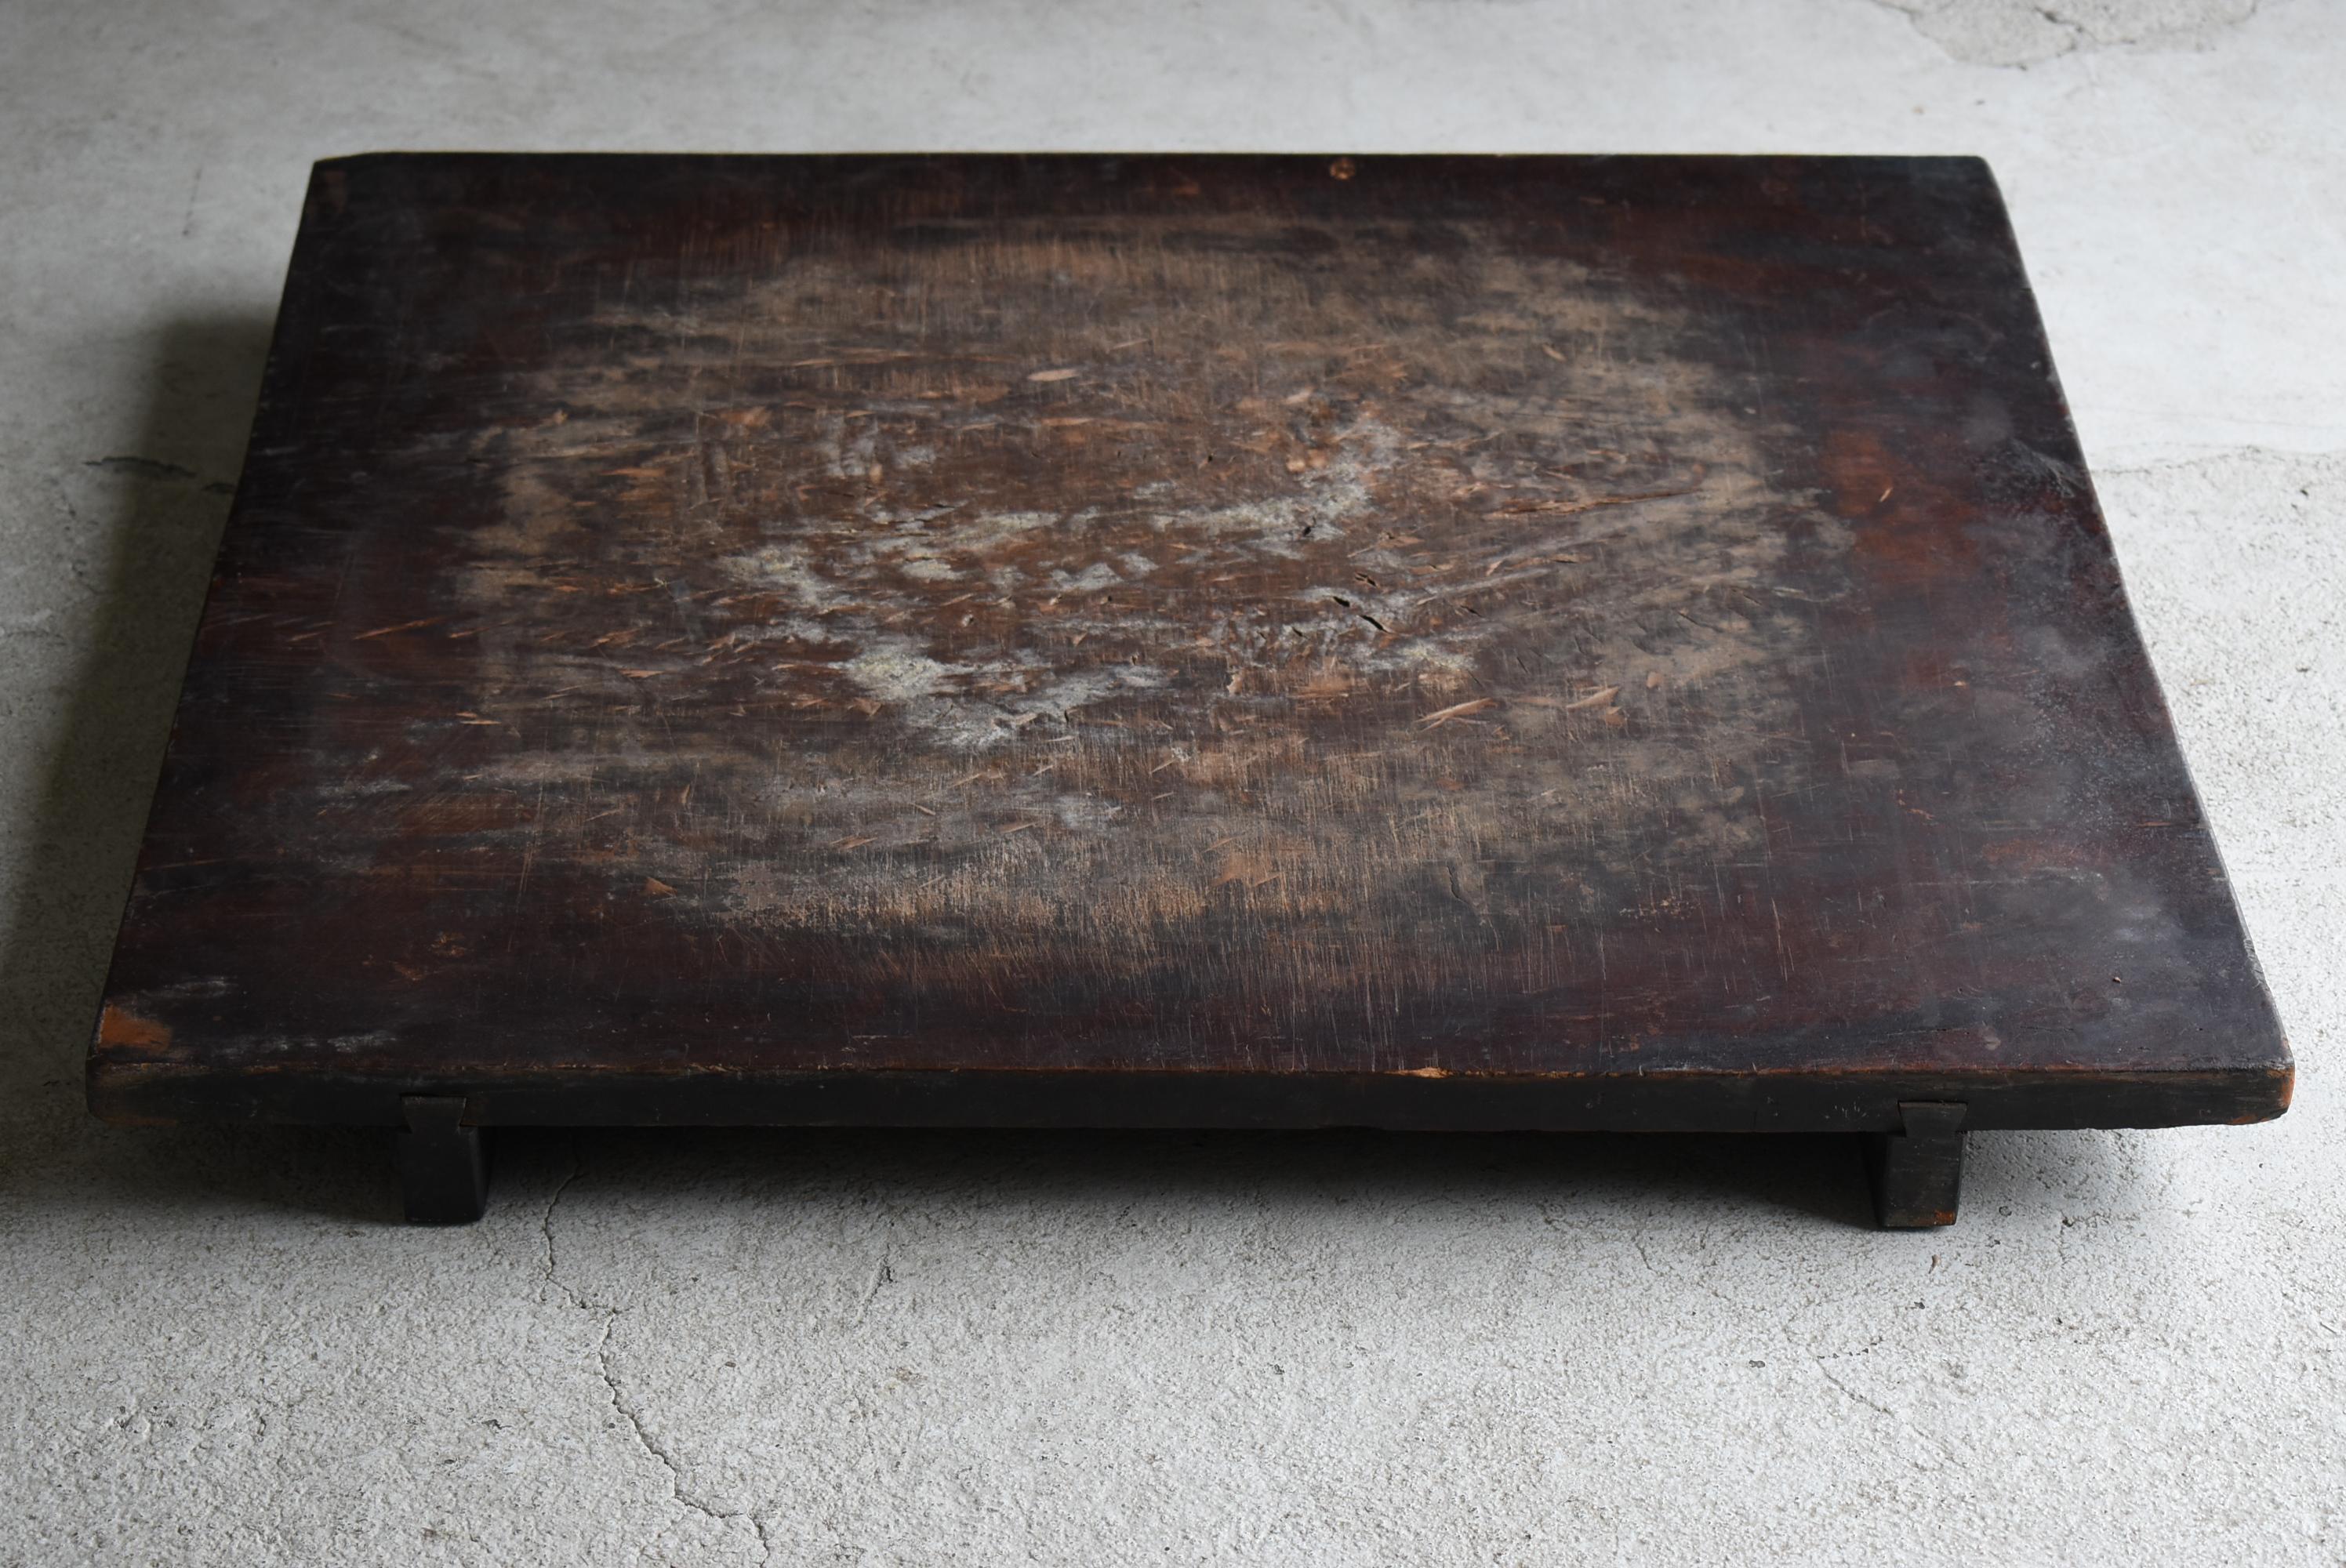 Japanese Antique Wooden Board 1860s-1900s / Abstract Art Low Table Wabi Sabi 1